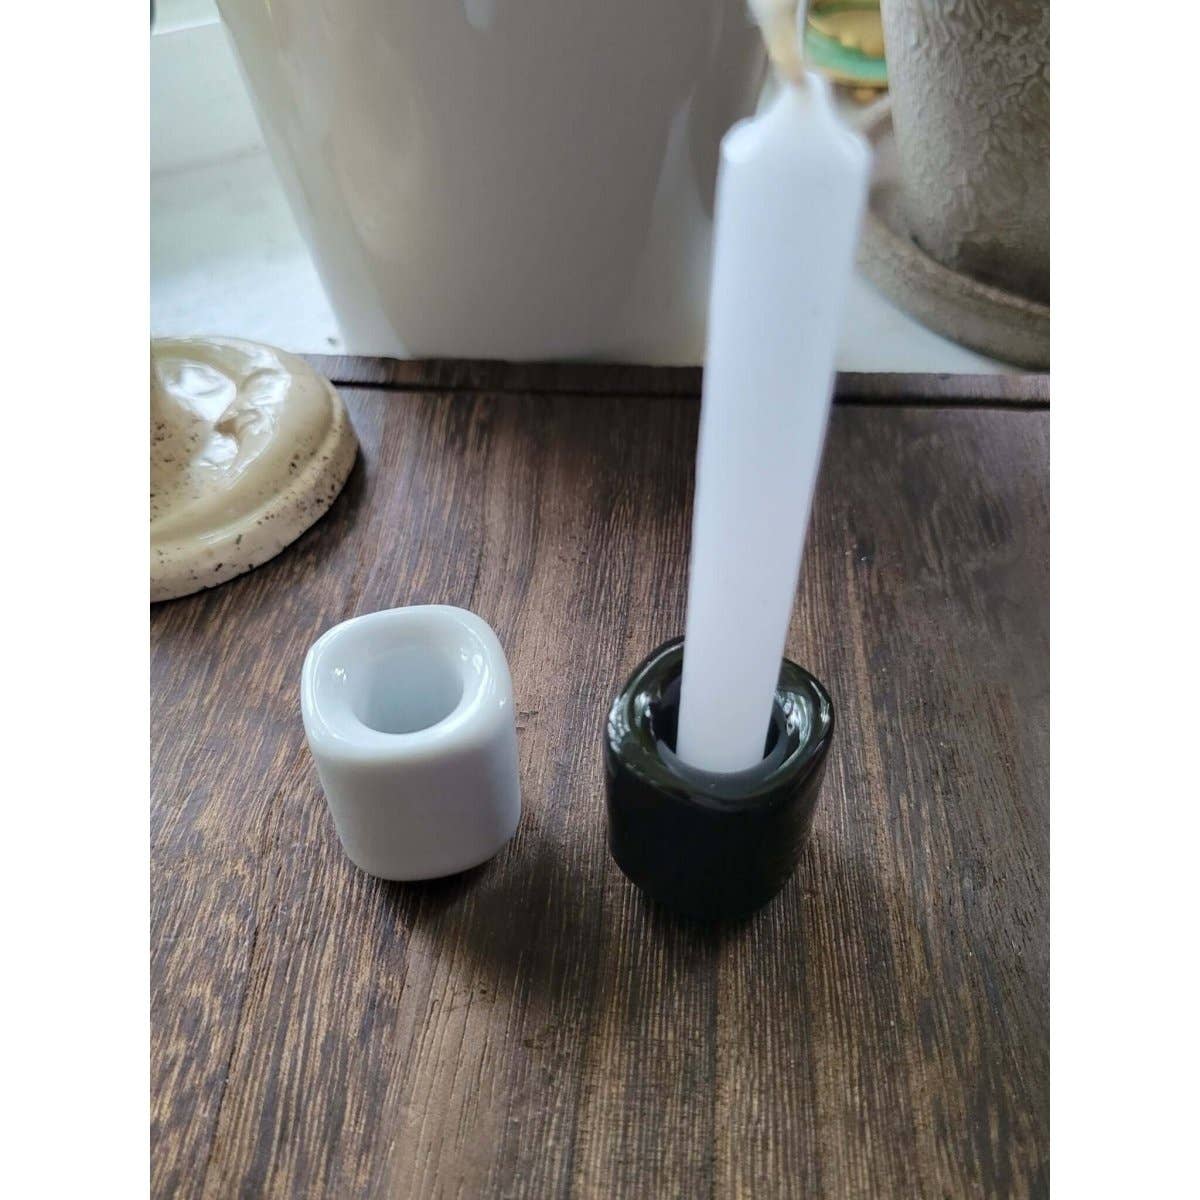 Ceramic Chime Candle Holder